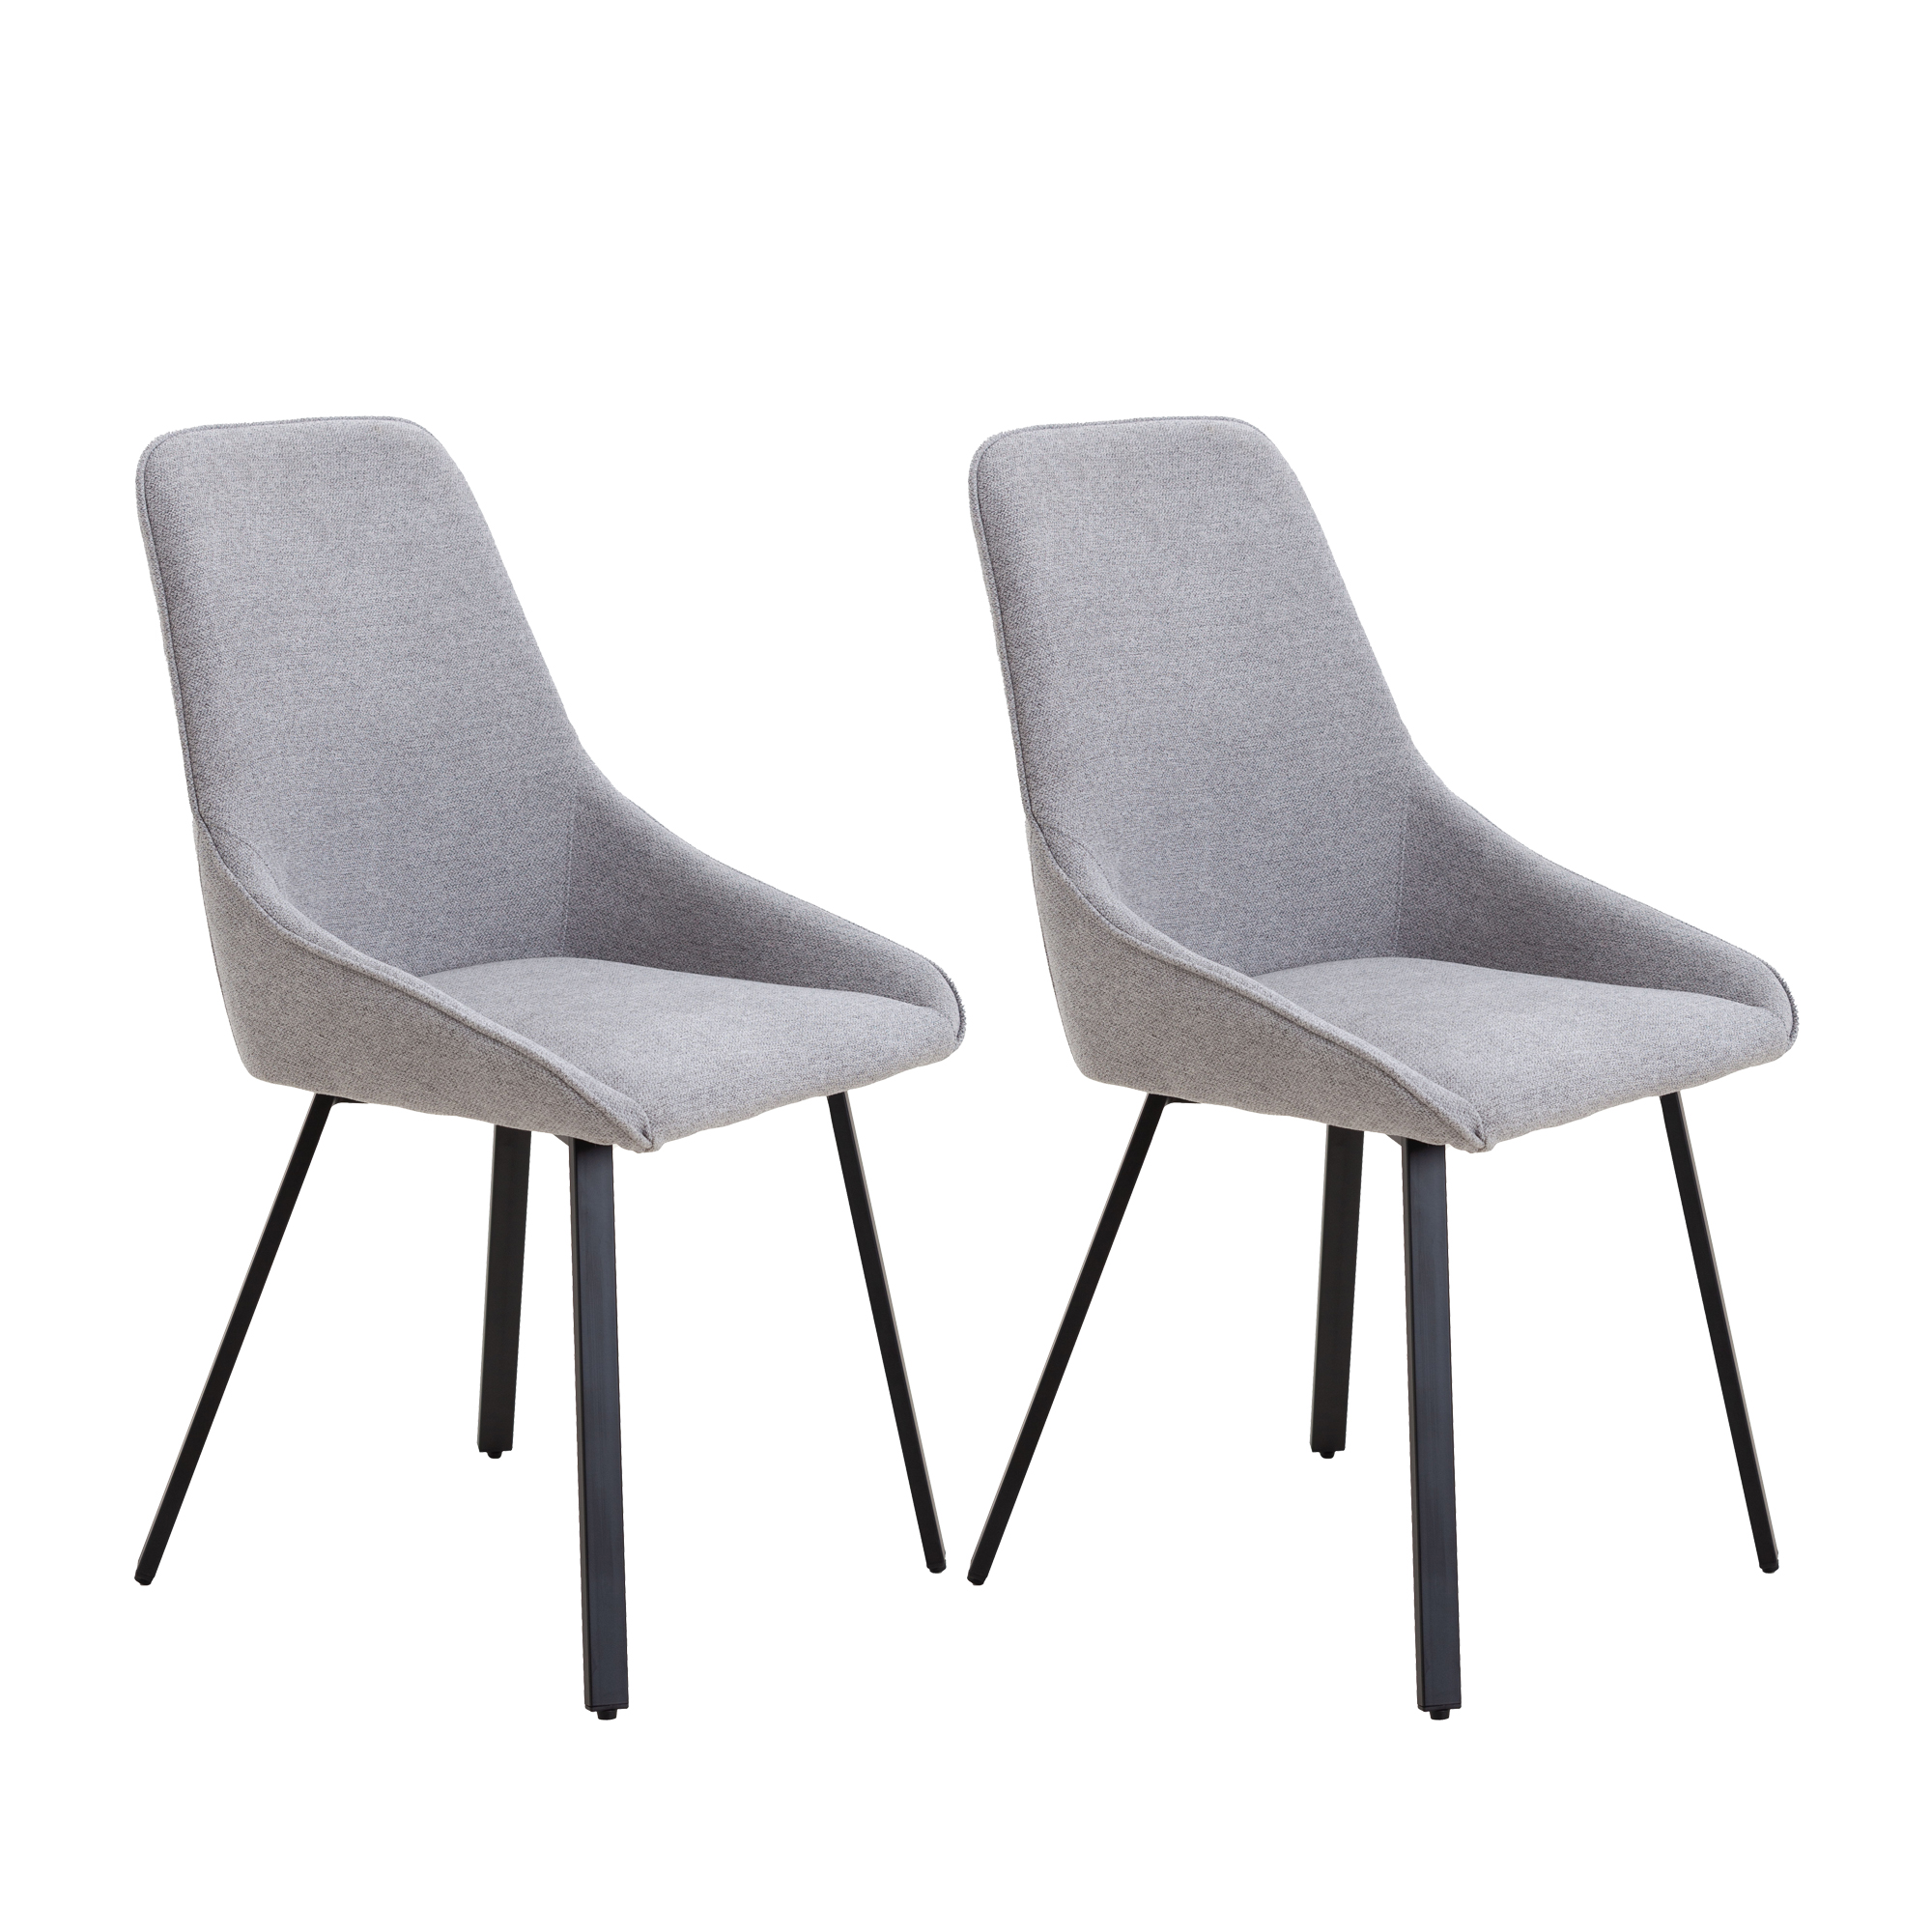 Dining Chairs set of 2, Upholstered Side Chairs, Adjustable Kitchen Chairs Accent Chair Cushion Upholstered Seat with Metal Legs for Living Room Grey